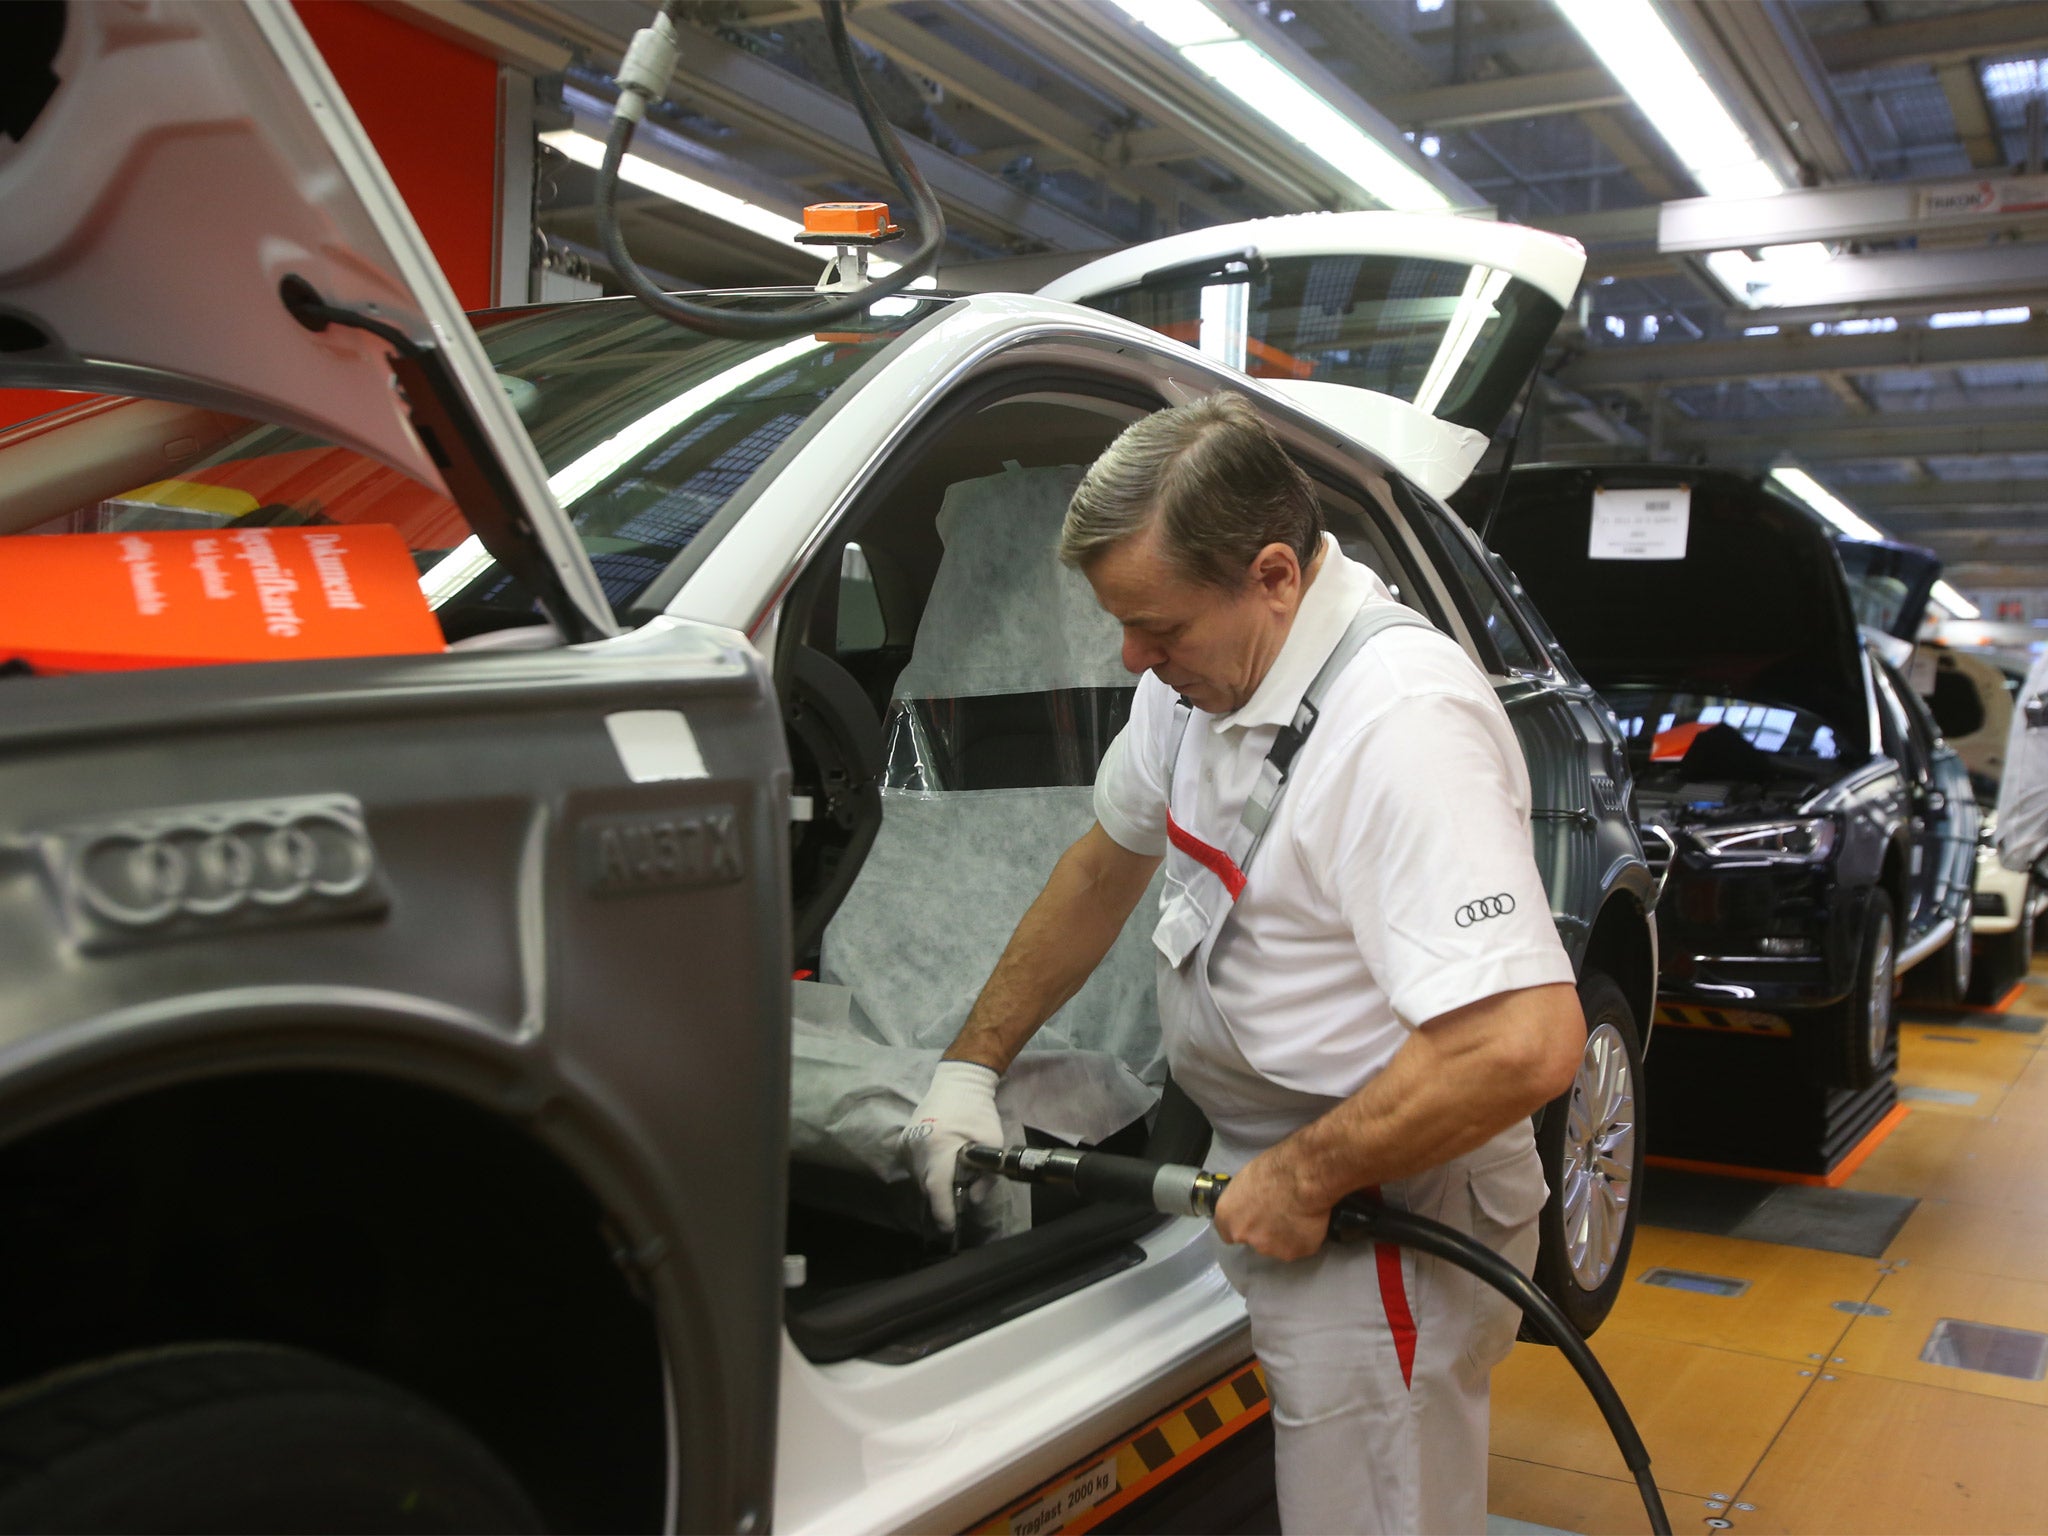 Germany has seen a 0.7% expansion in the second quarter